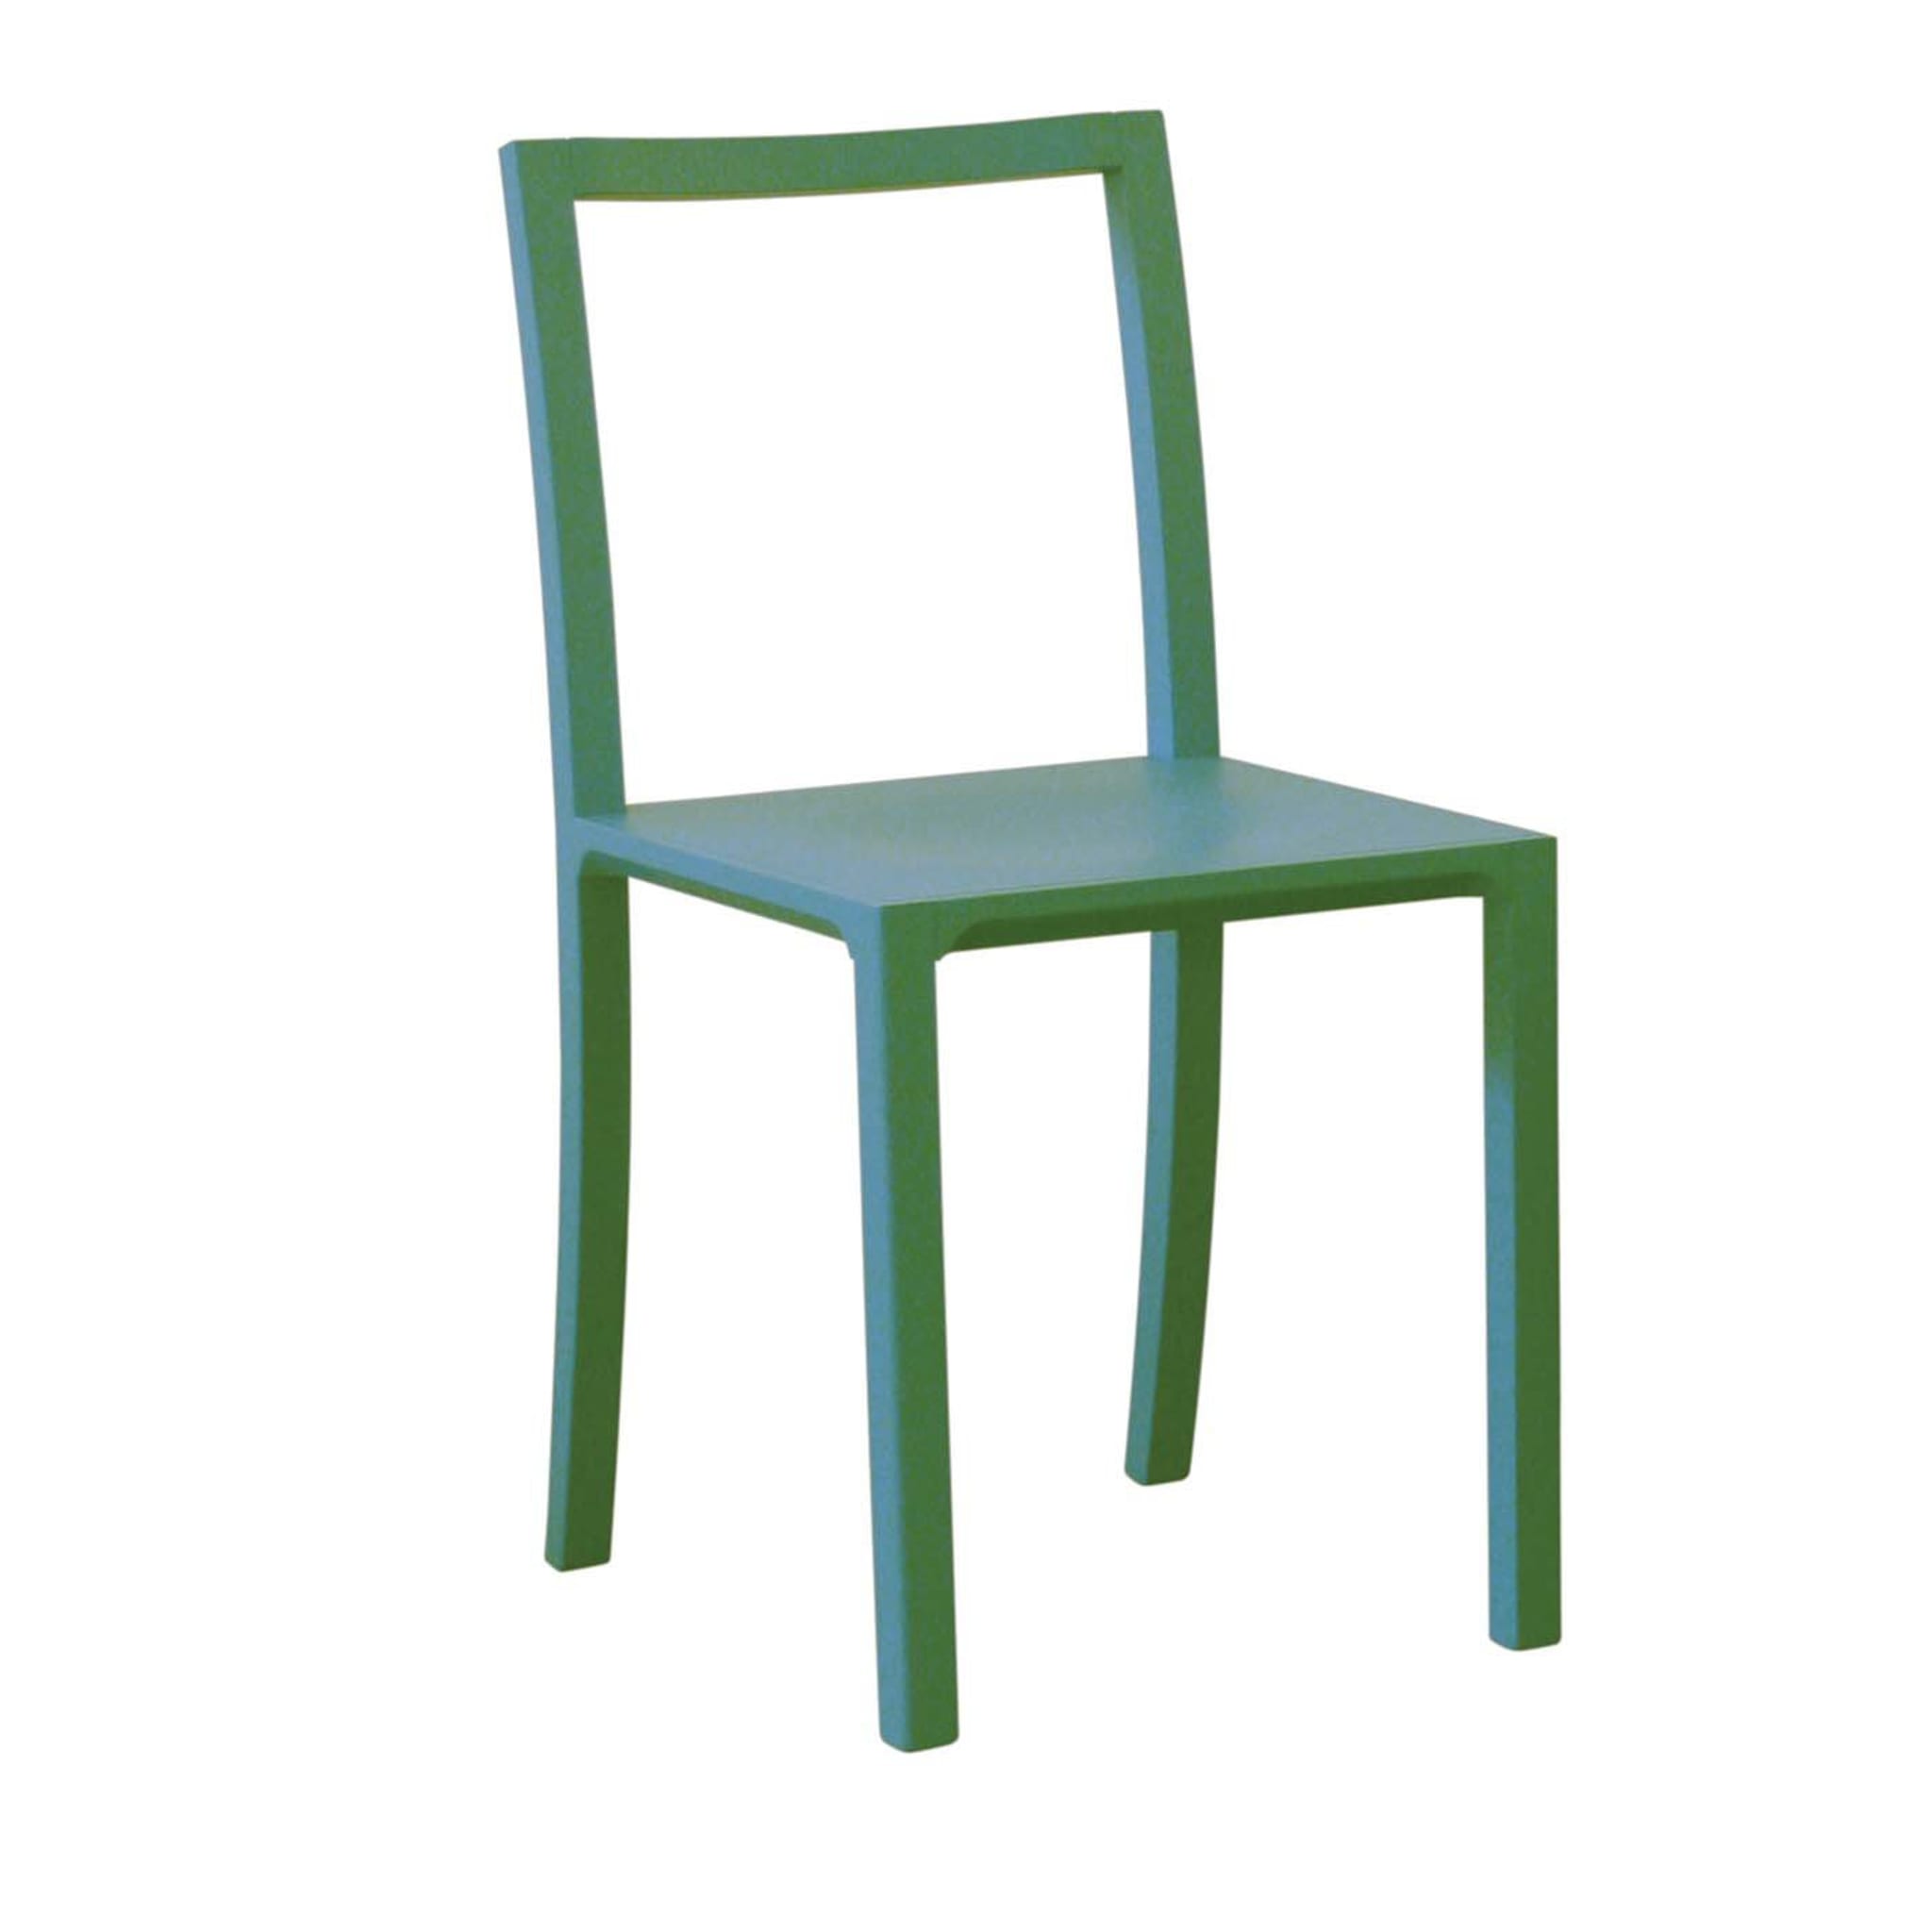 Framework Set of 2 Green Chairs by Steffen Kehrle - Main view